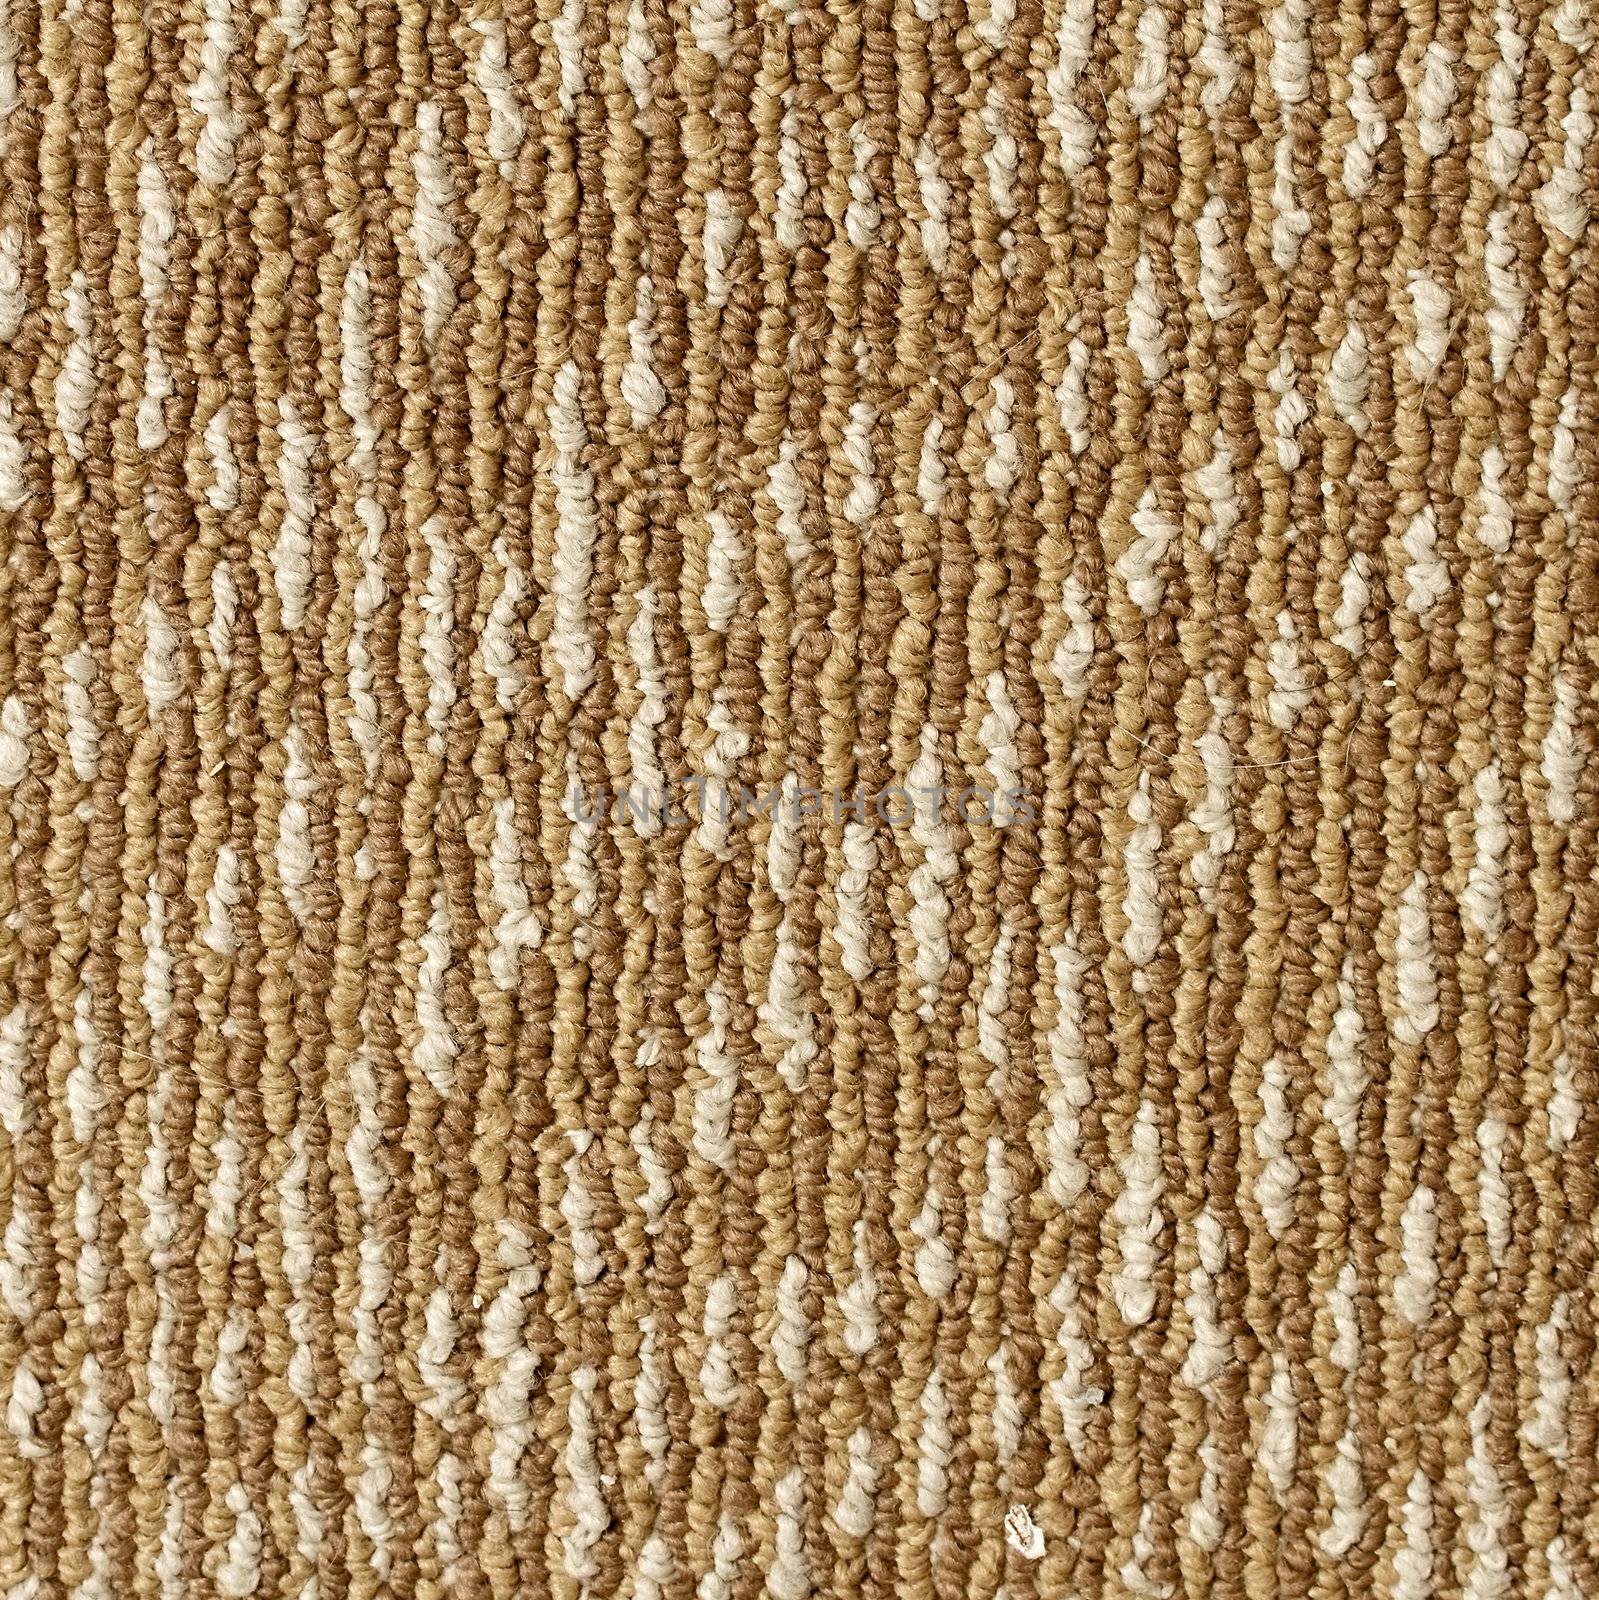 Pattern of camel wool fabric texture background.